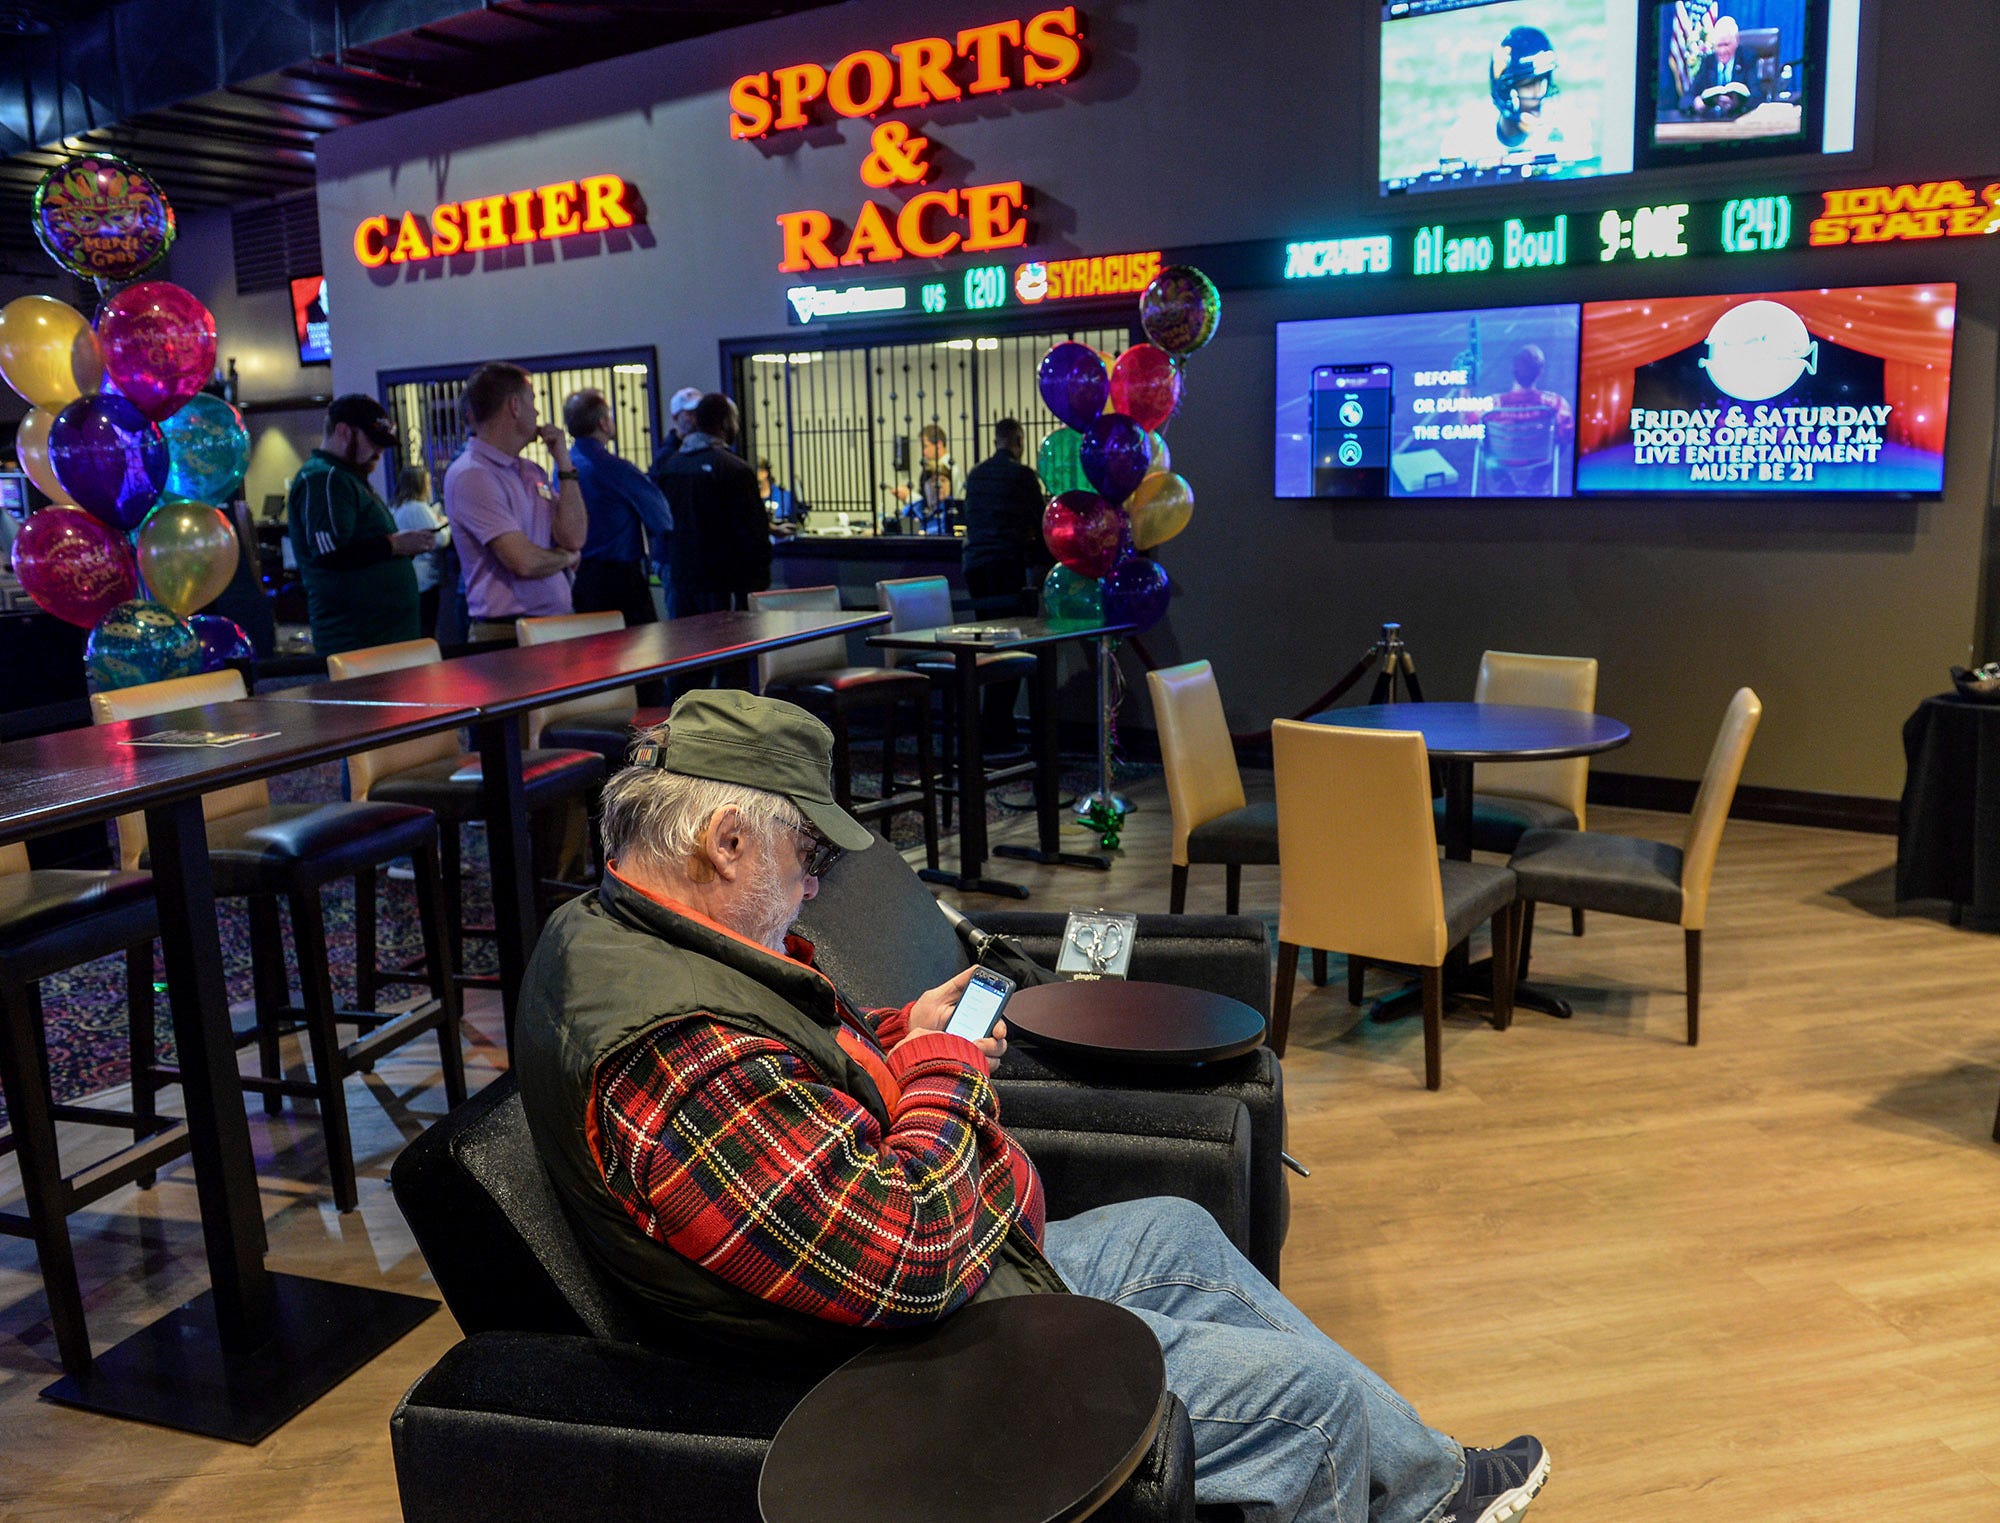 Tom Baldwin of Paint Creek, W.V., tries to download the new online sports betting application onto his smart phone soon after the official ribbon cutting opening of the sportsbook betting app at Mardi Gras Casino & Resort in Crosslanes, W.V. Friday Dec. 28, 2018.